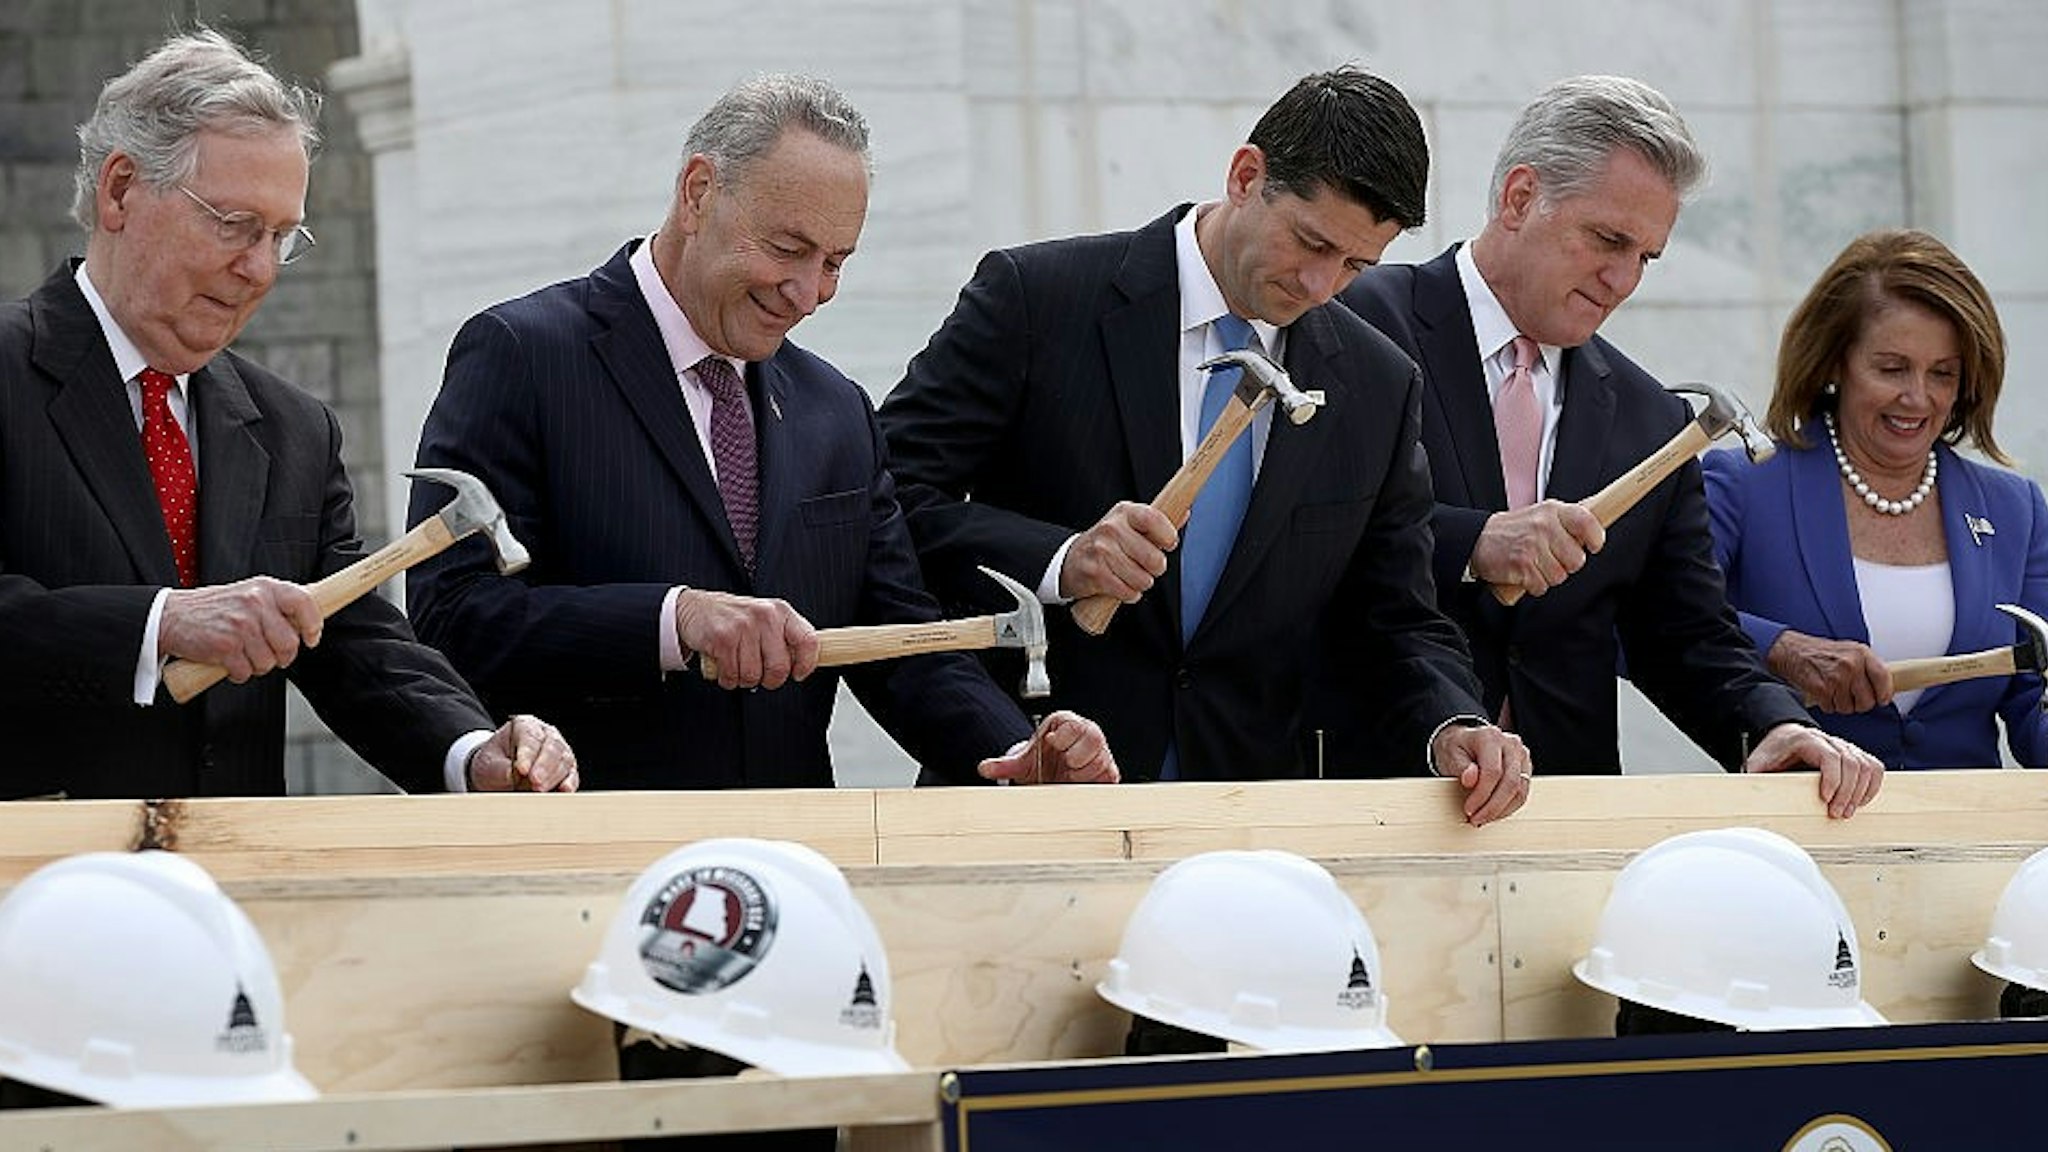 WASHINGTON, DC - SEPTEMBER 21: (L-R) Senate Majority Leader Mitch McConnell (R-KY), Sen. Chuck Schumer (D-NY), Speaker of the House Paul Ryan (R-WI), House Majority Leader Kevin McCarthy (R-CA) and House Minority Leader Nancy Pelosi (D-CA) drive nails into a piece of lumber at the "First Nail Ceremony" September 21, 2016 outside the U.S. Capitol in Washington, DC. The ceremony marked the official launch of construction on the Inaugural platform where the next President of the United States will take the oath of office on Friday, January 20, 2017. (Photo by